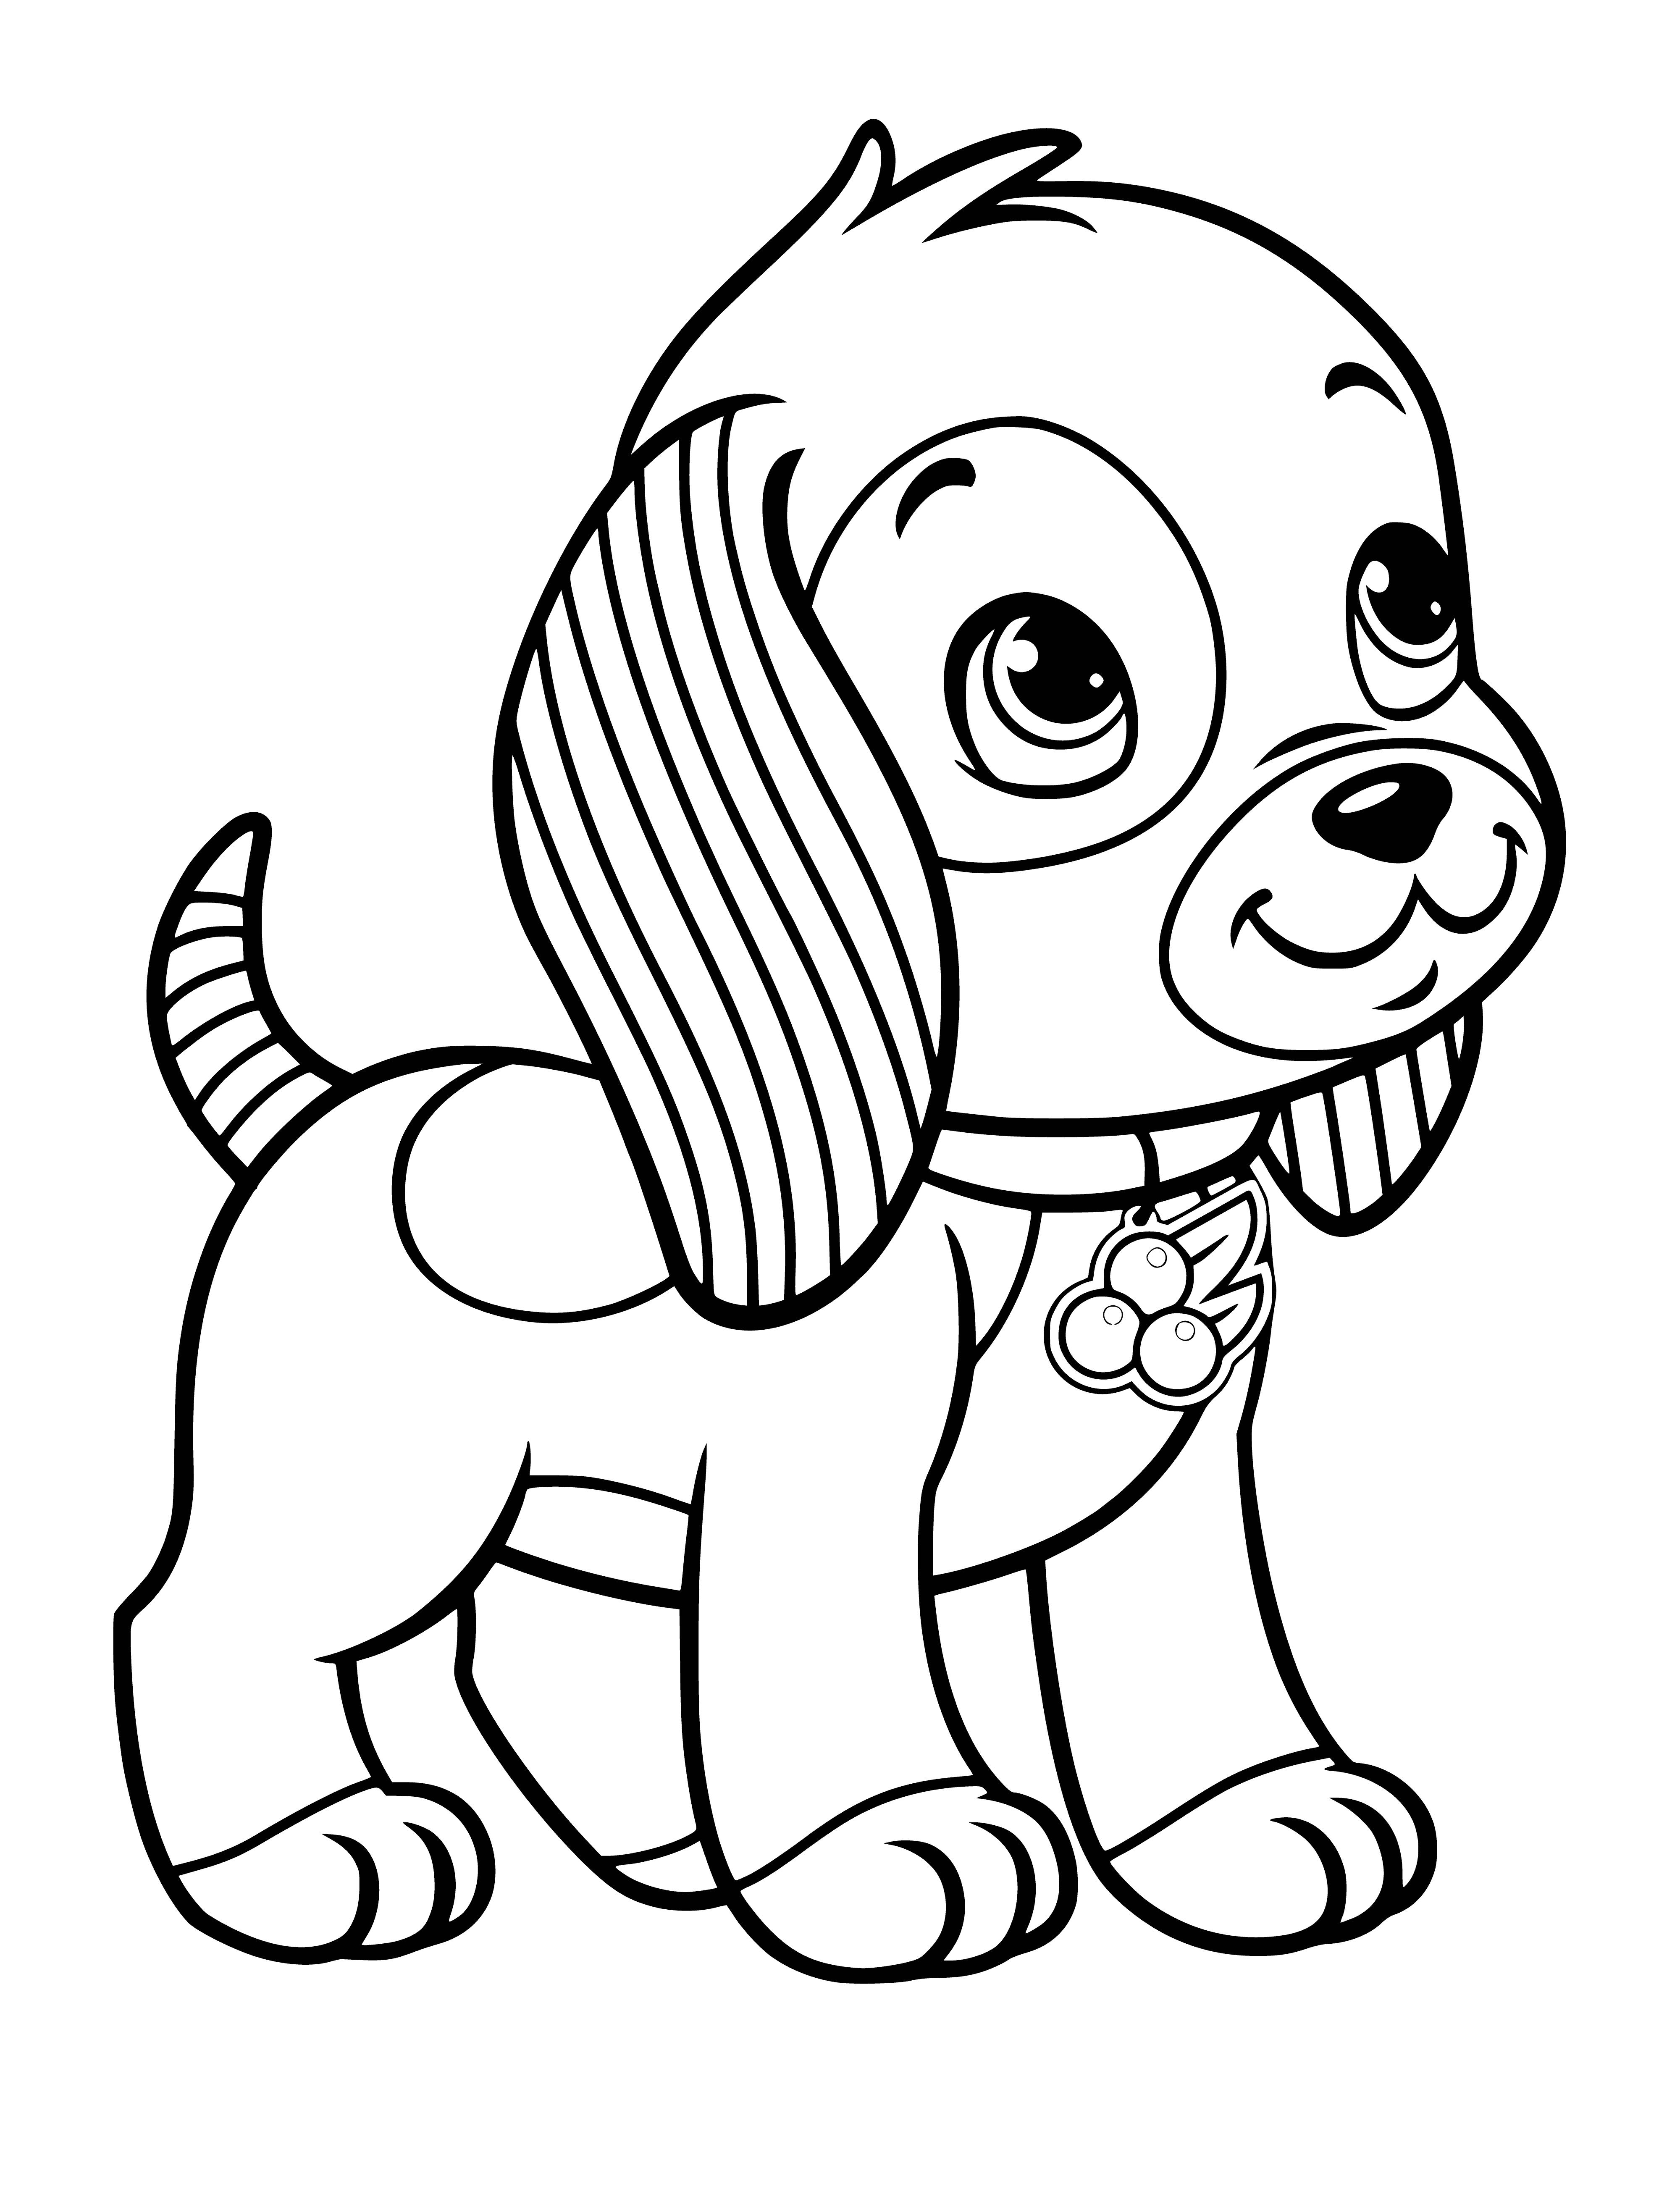 coloring page: Compact pink puppy w/black nose & spots sits on white cushion—the Cherry Pet!